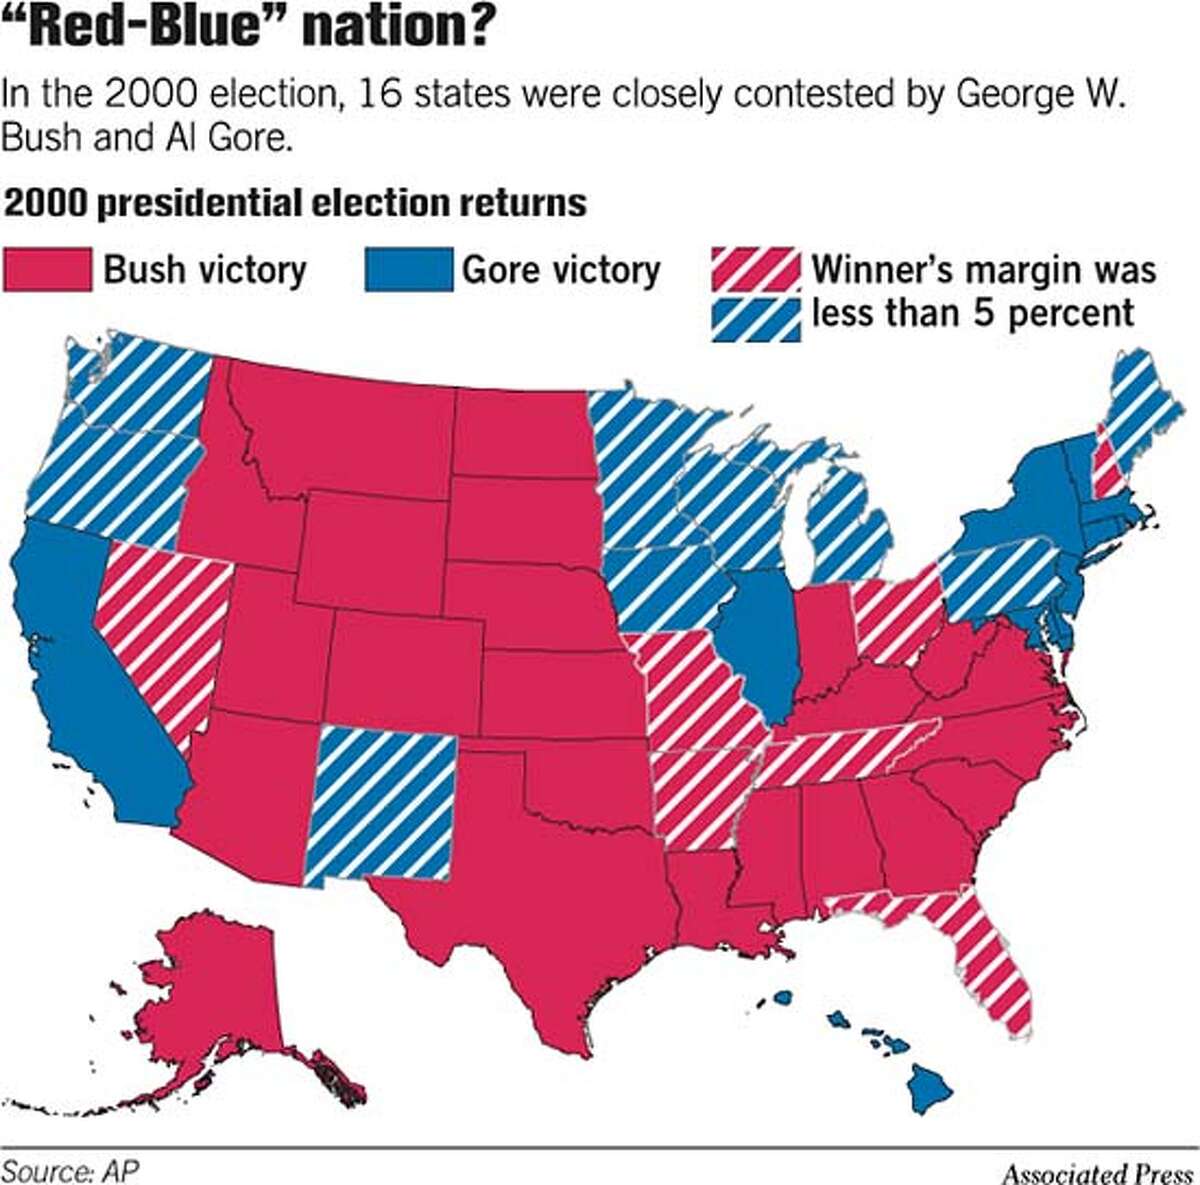 Red and blue states not blackandwhite / Sharp demarcations on